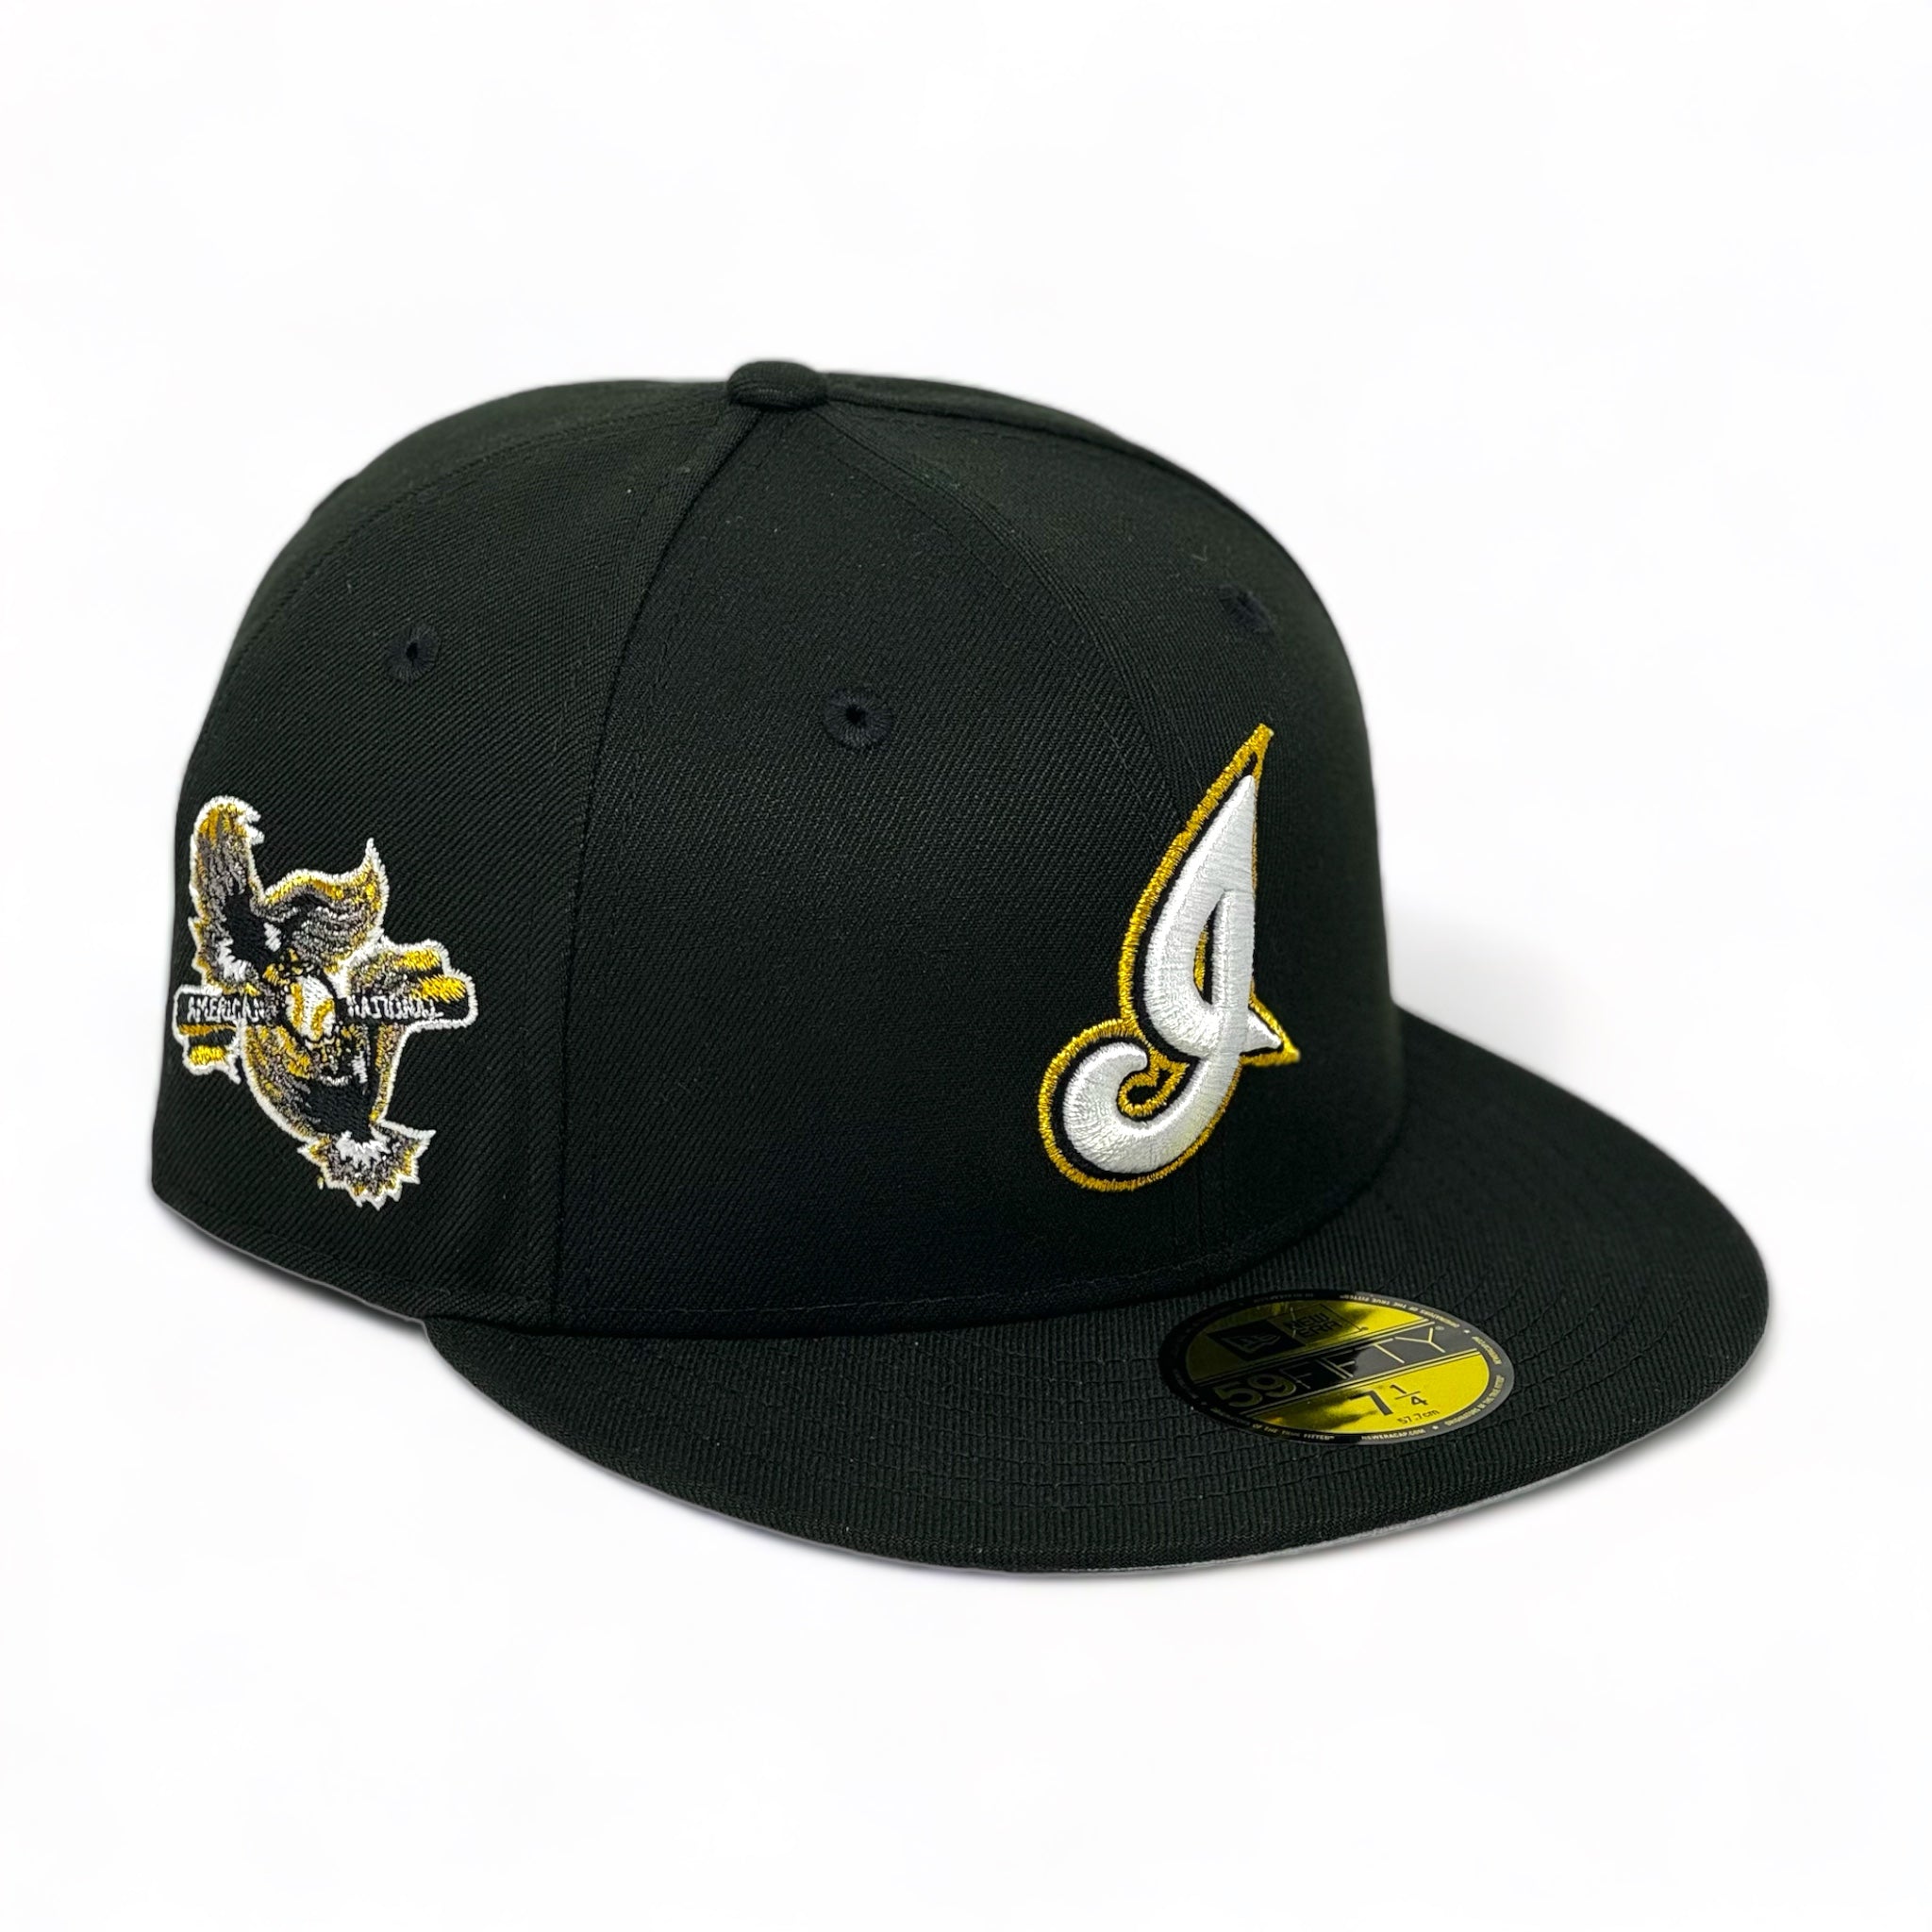 CLEVELAND INDIANS (BLACK) "INTER-LEAGUE" NEW ERA 59FIFTY FITTED